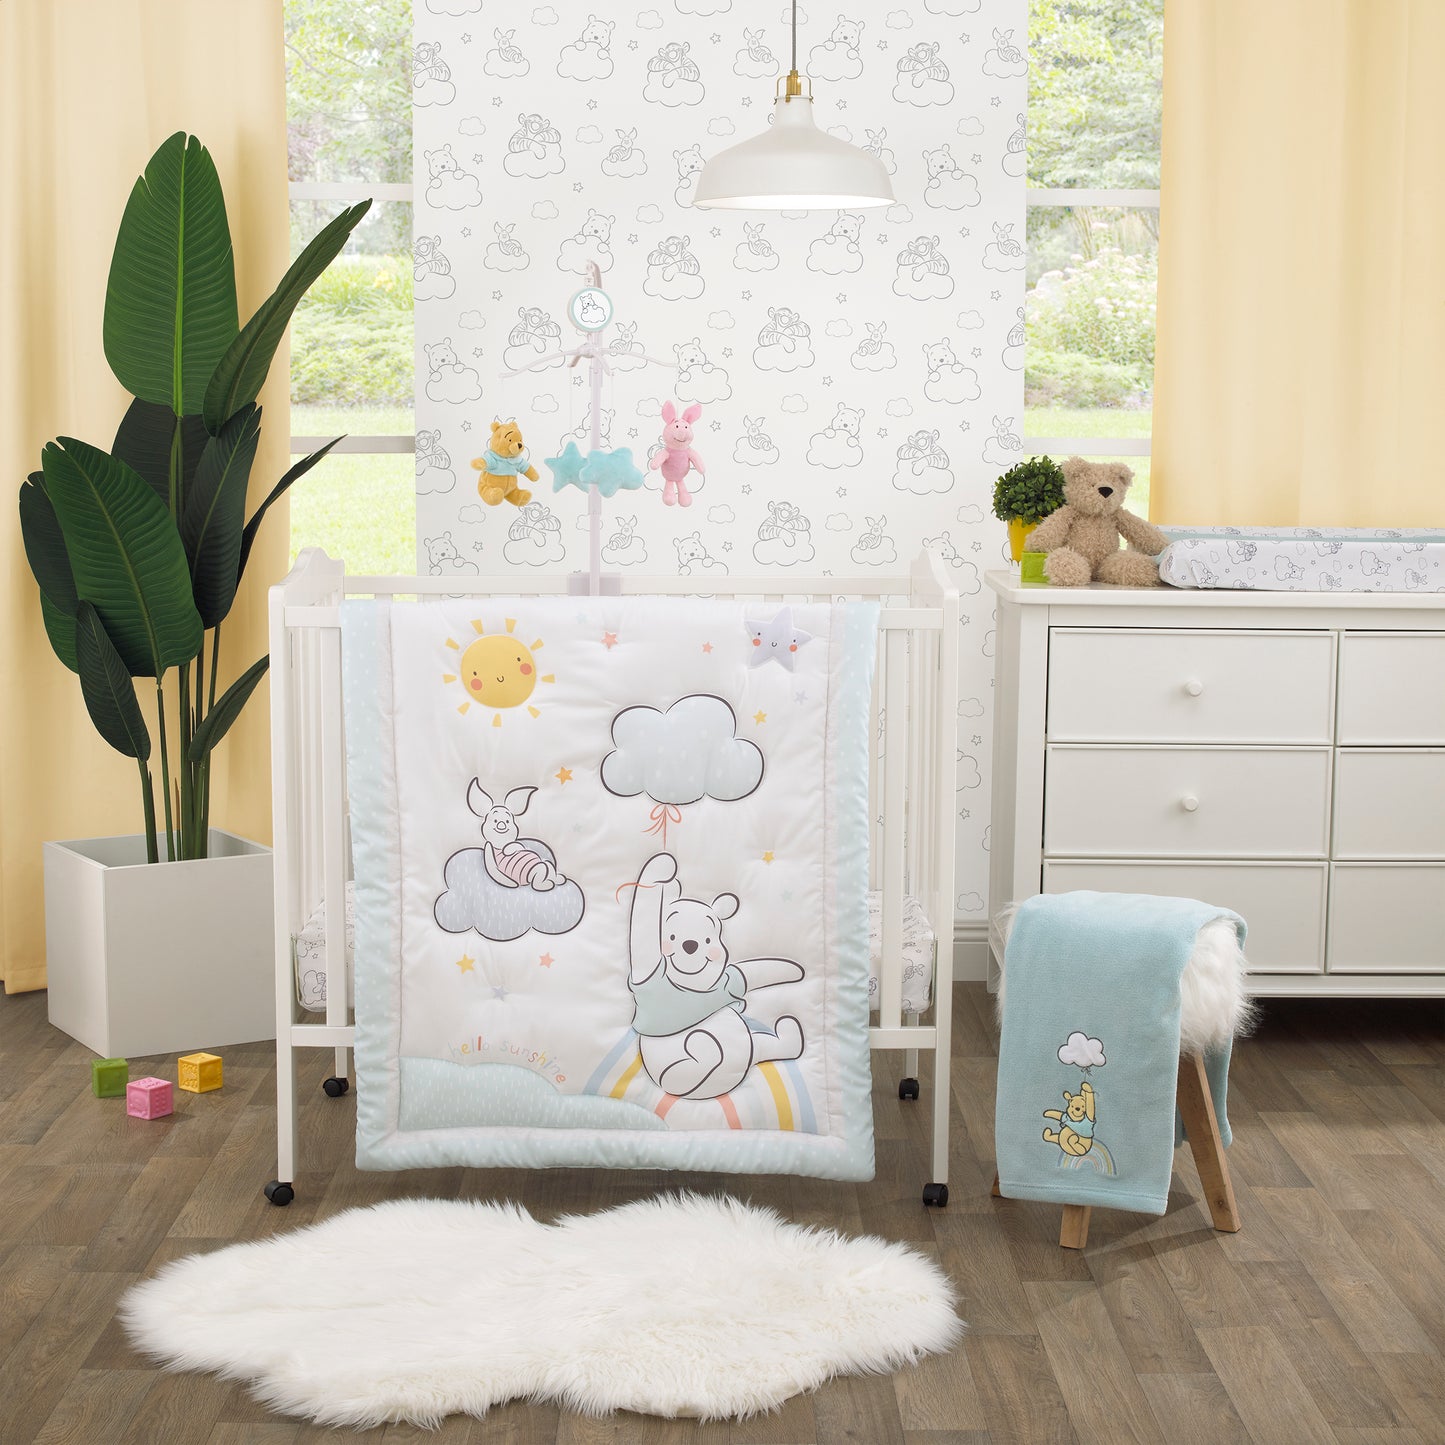 Disney Winnie the Pooh Hello Sunshine White and Aqua Piglet, Rainbow, Clouds, and Sun 3 Piece Nursery Mini Crib Bedding Set - Comforter and Two Fitted Mini Crib Sheets